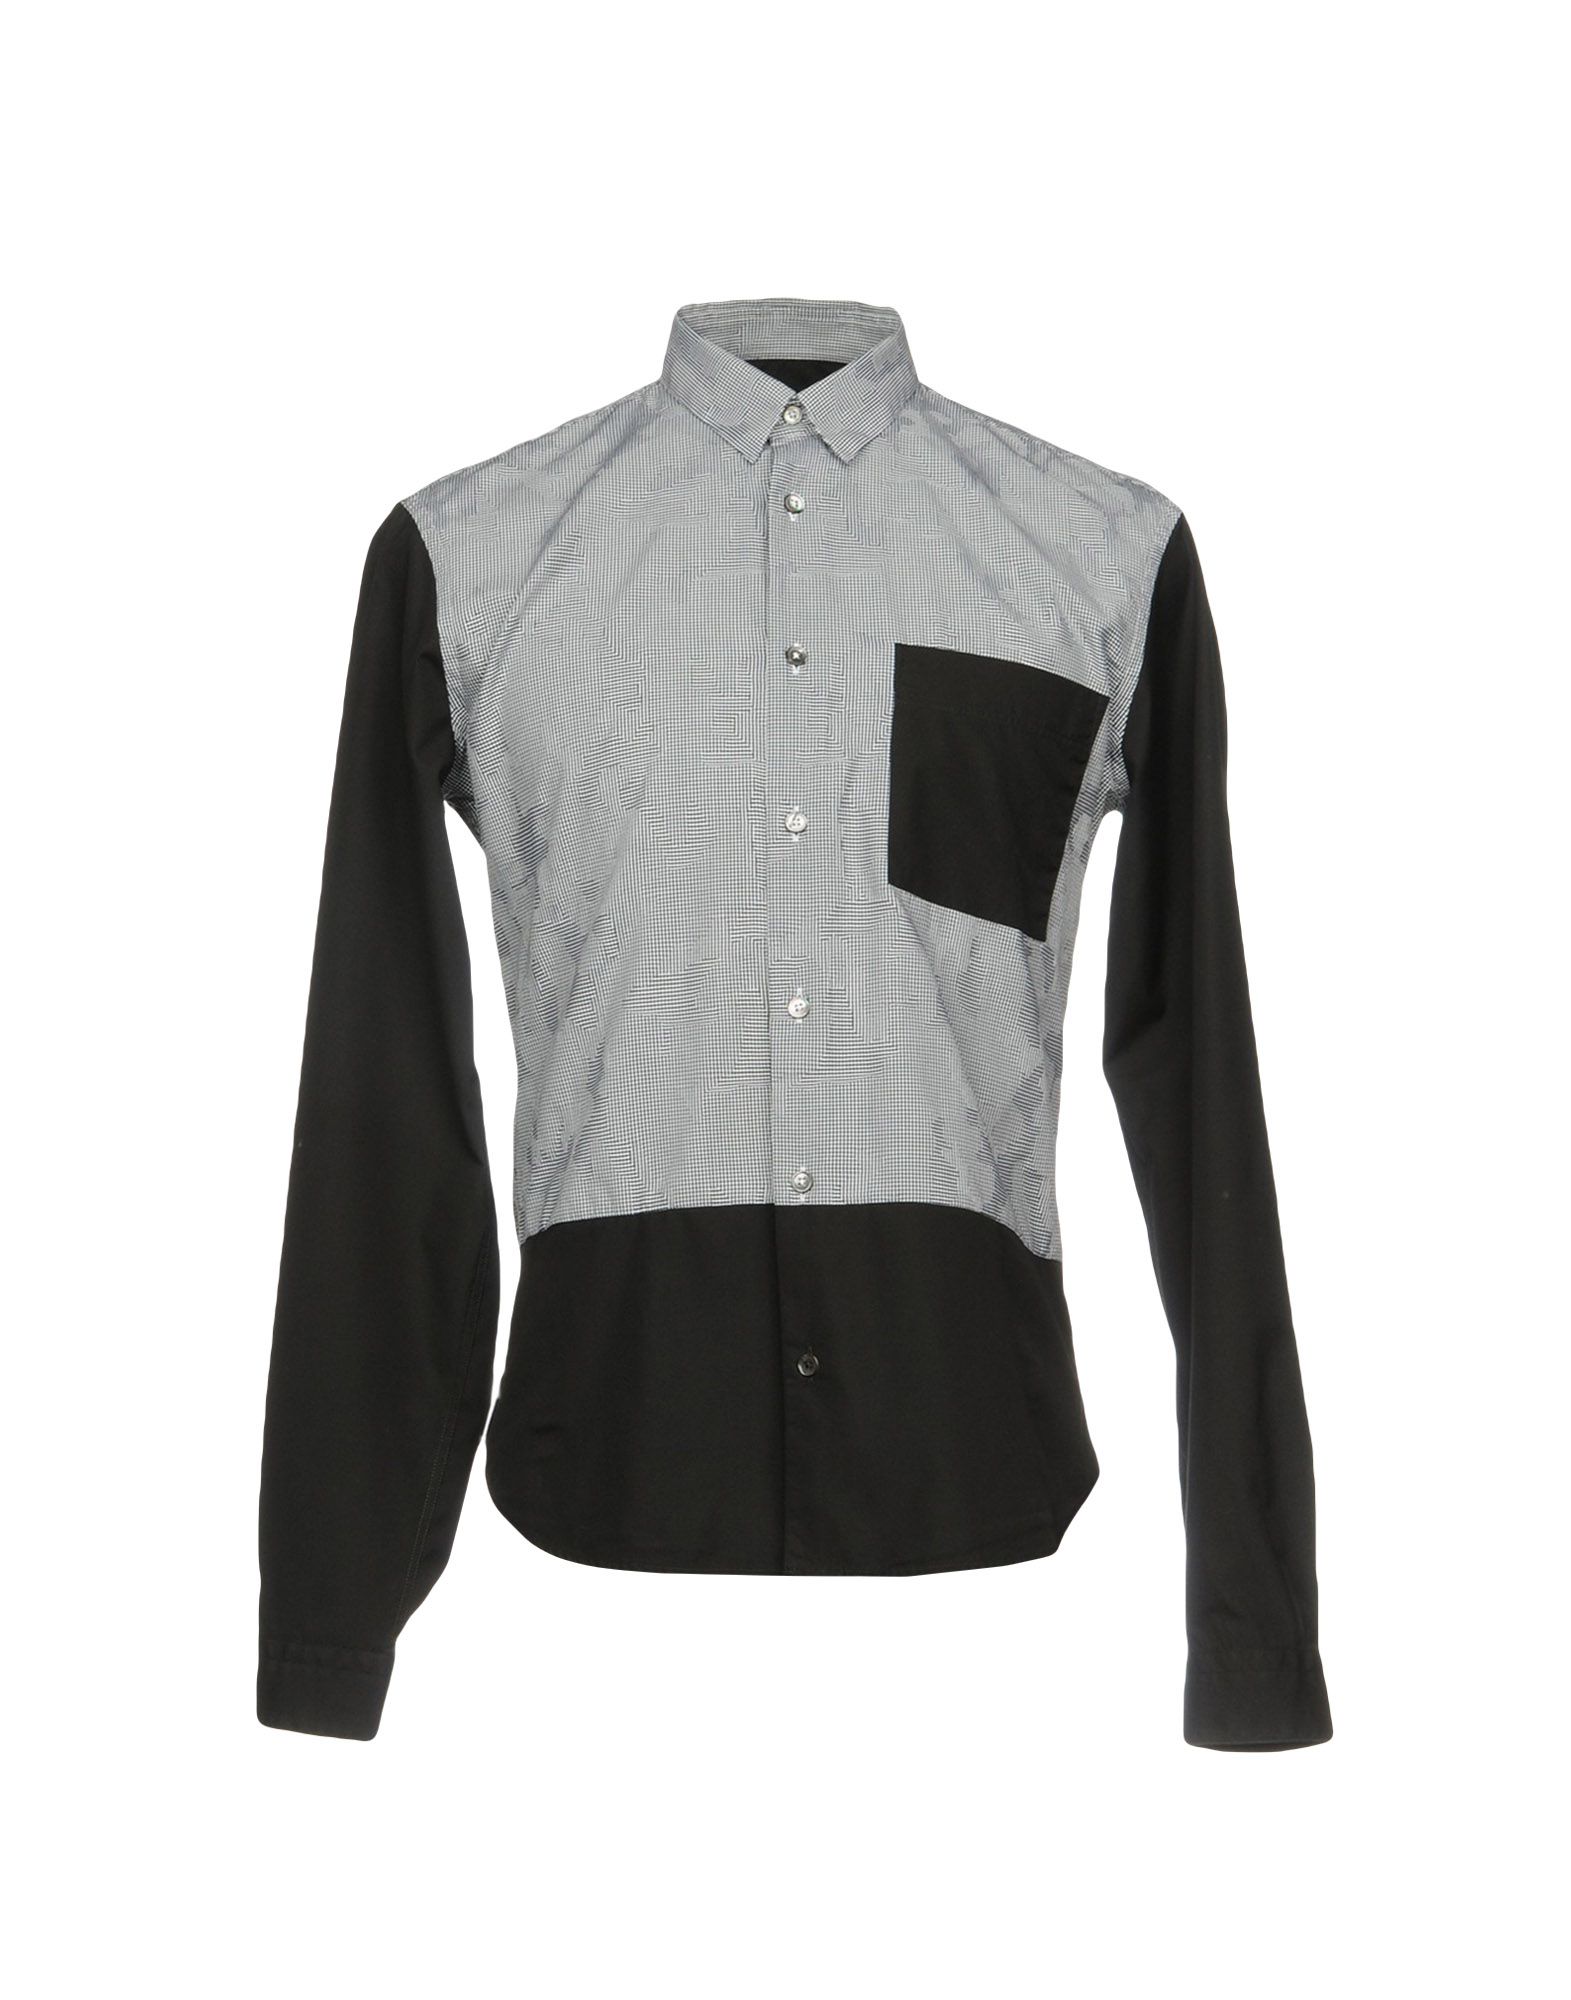 MCQ BY ALEXANDER MCQUEEN Checked shirt,38683626CW 3